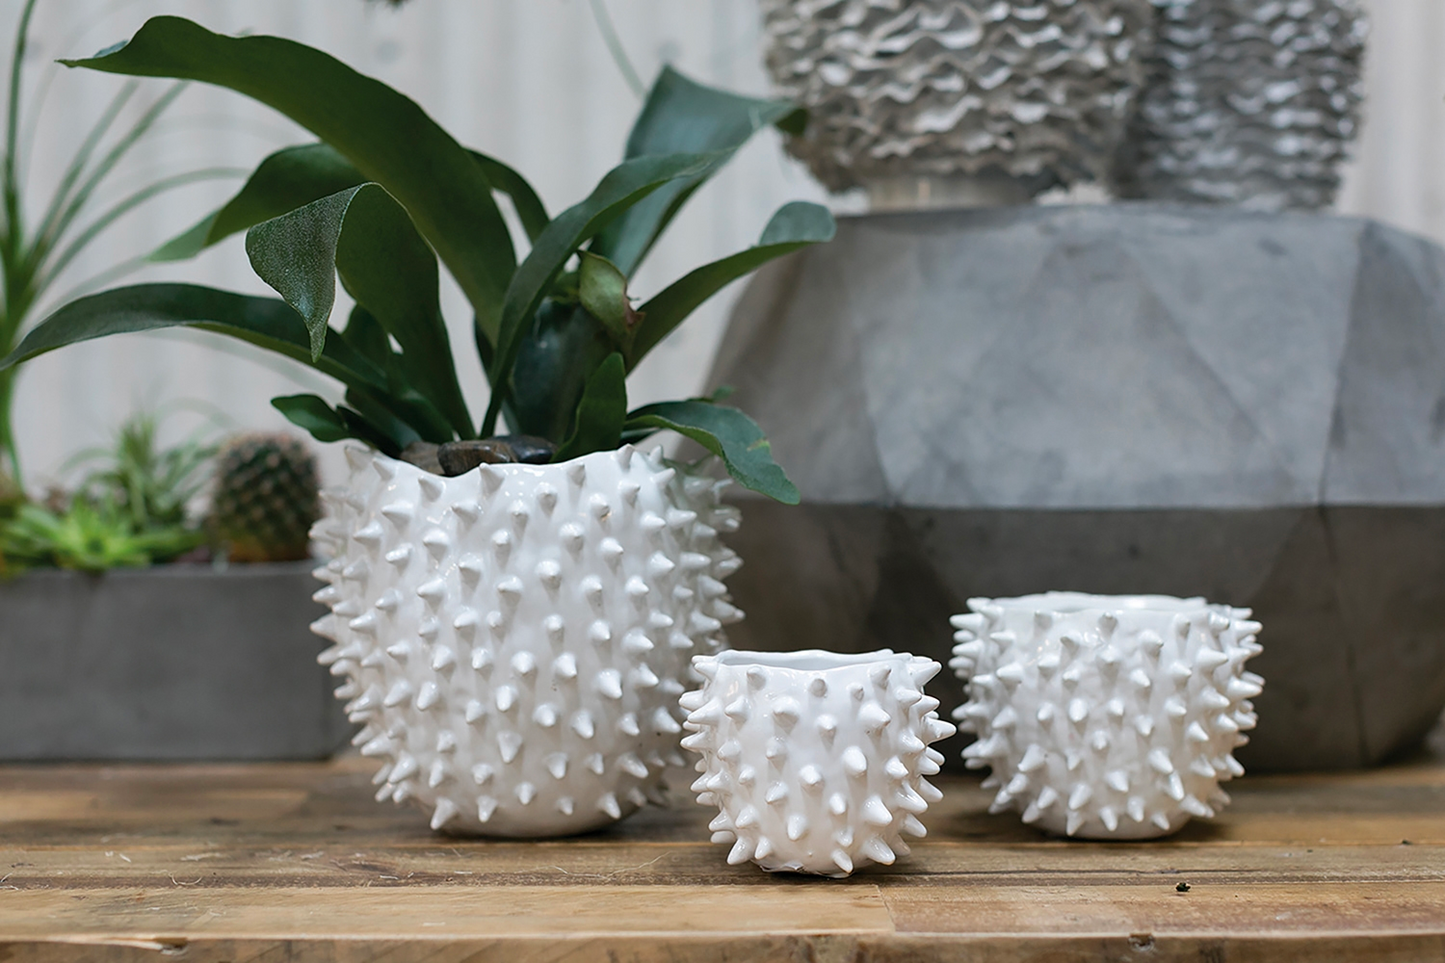 Set of 3 glossy white ceramic pots with spikes and plants